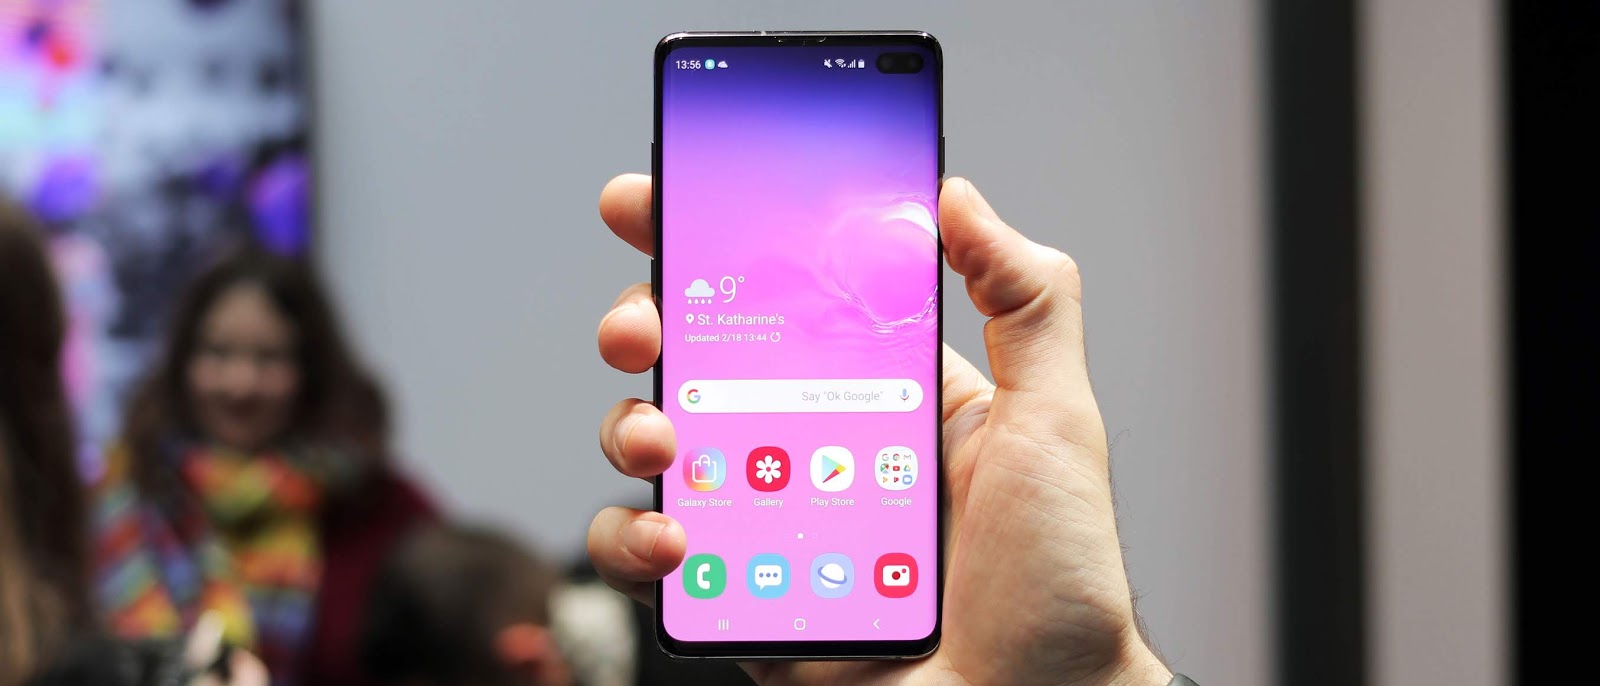 Details Of Samsung Galaxy S10 Variants